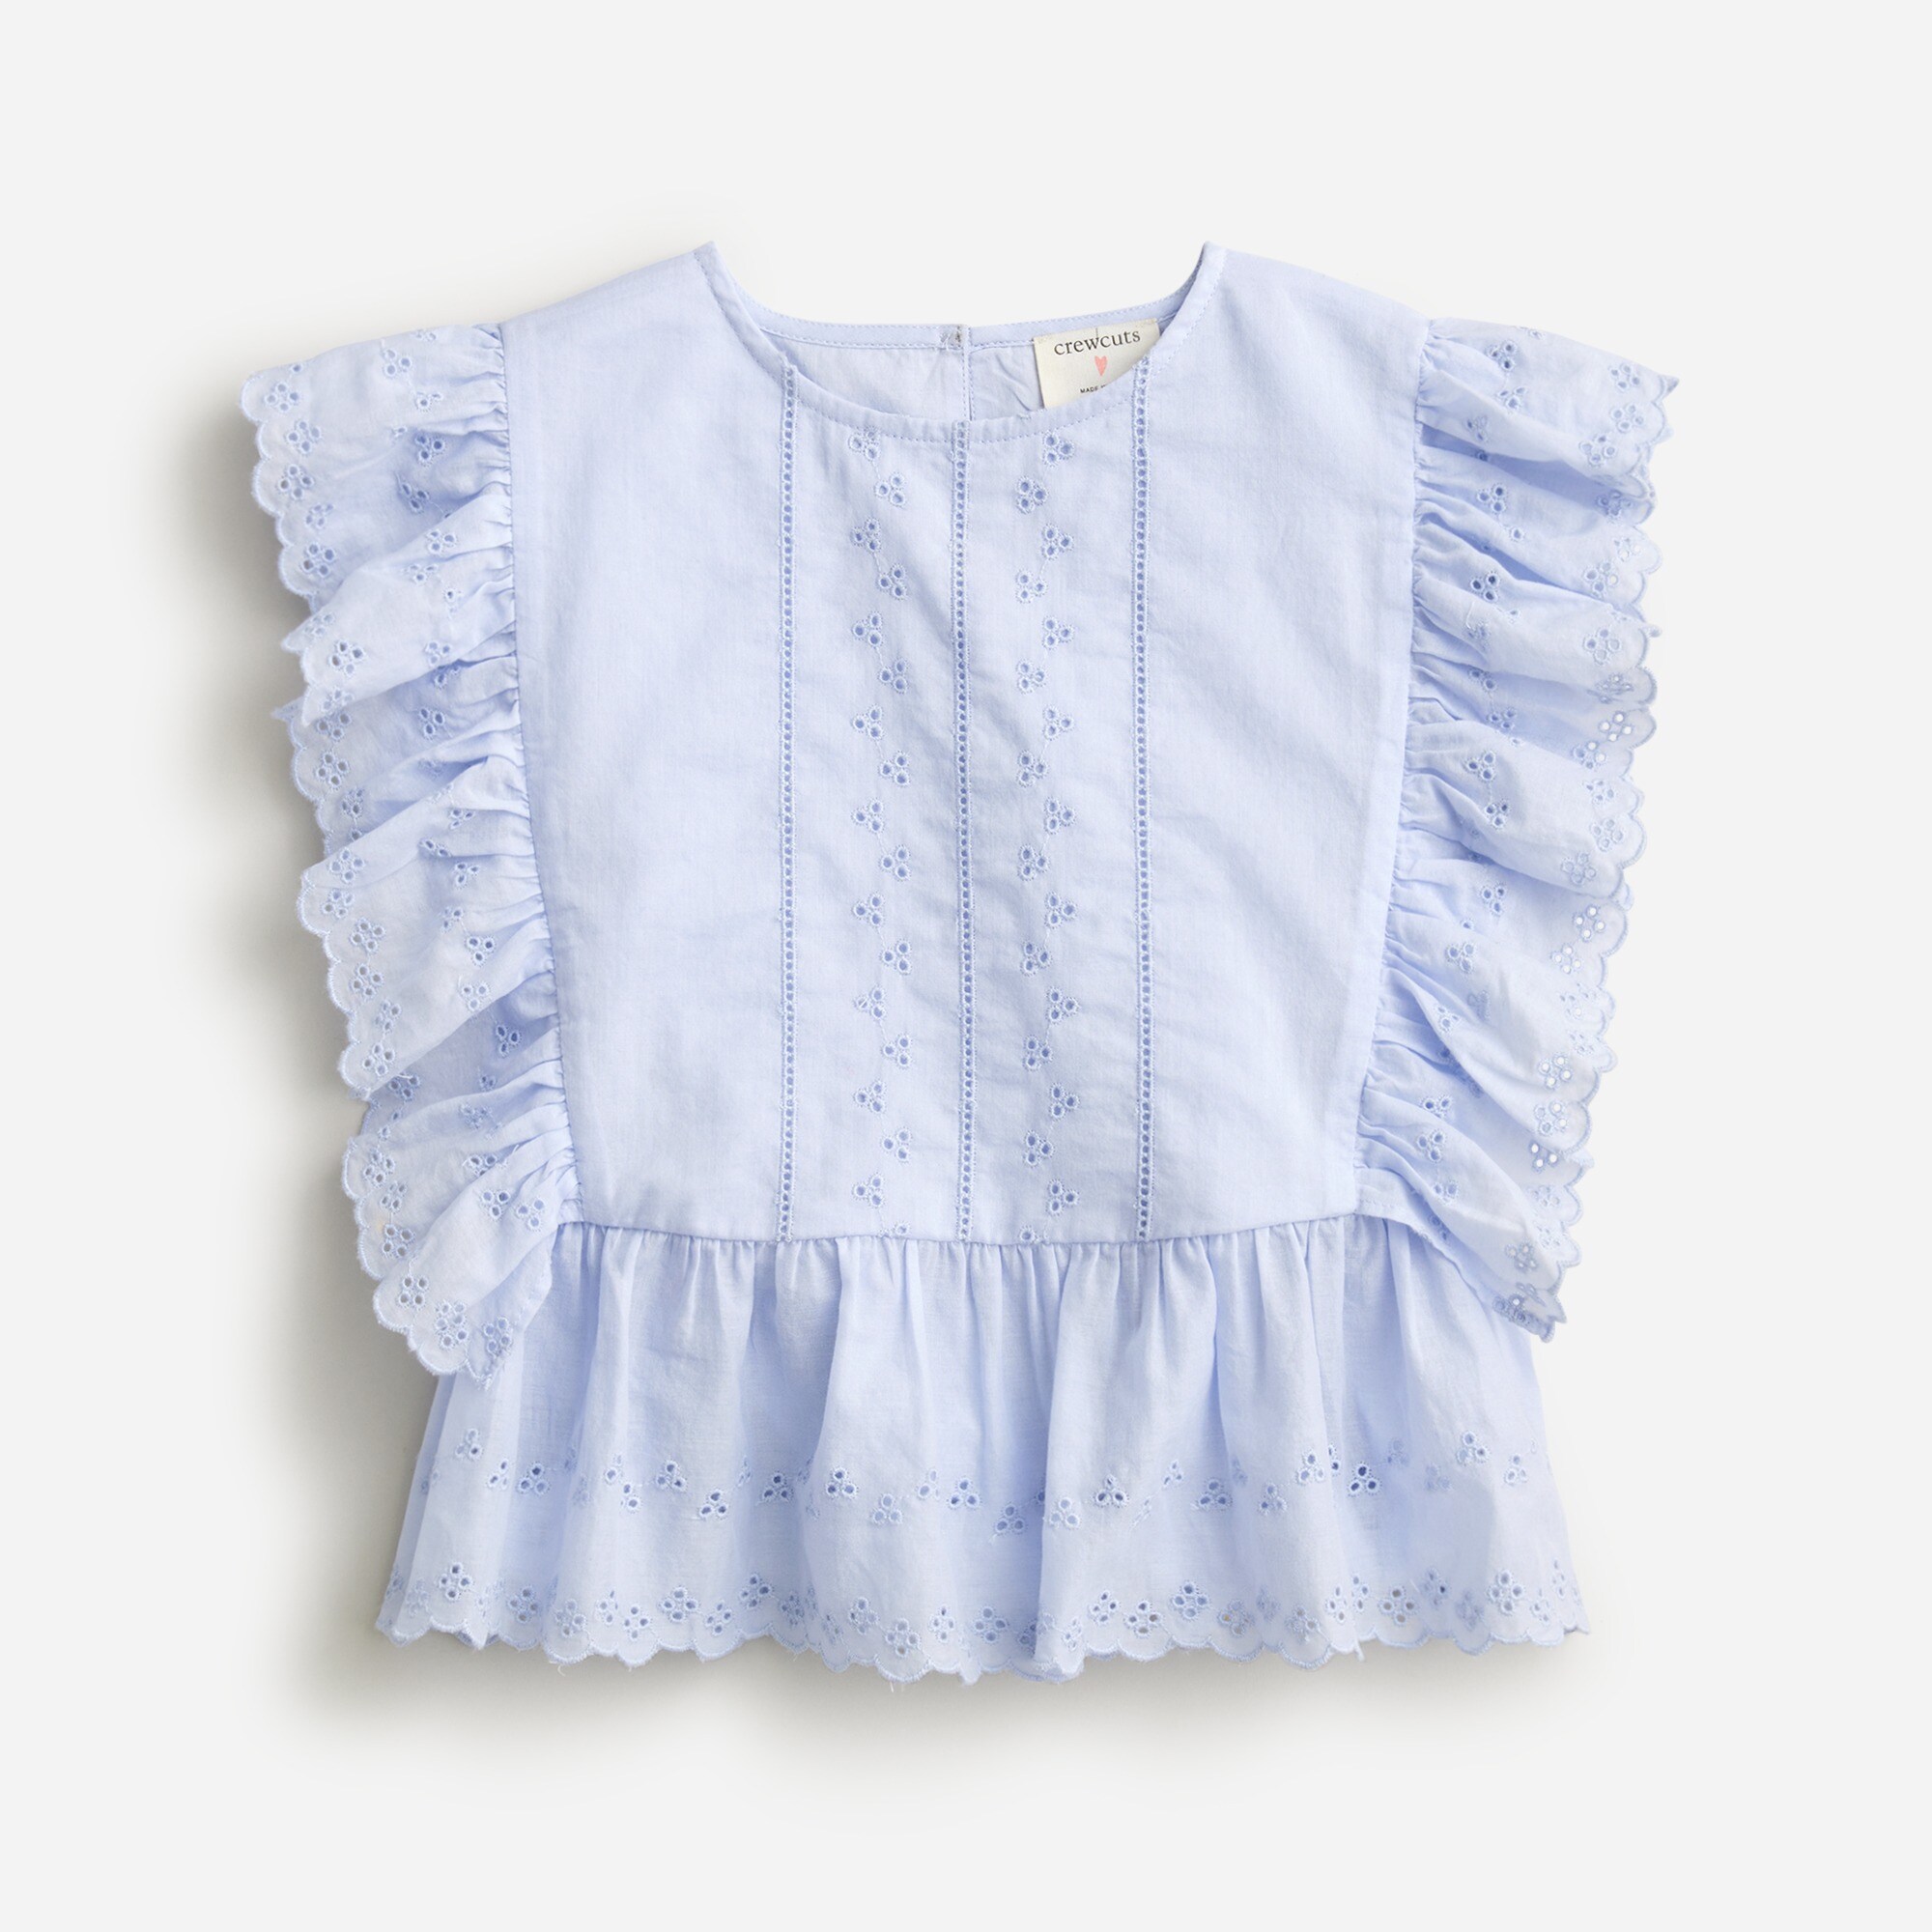  Girls' eyelet cropped top in cotton voile